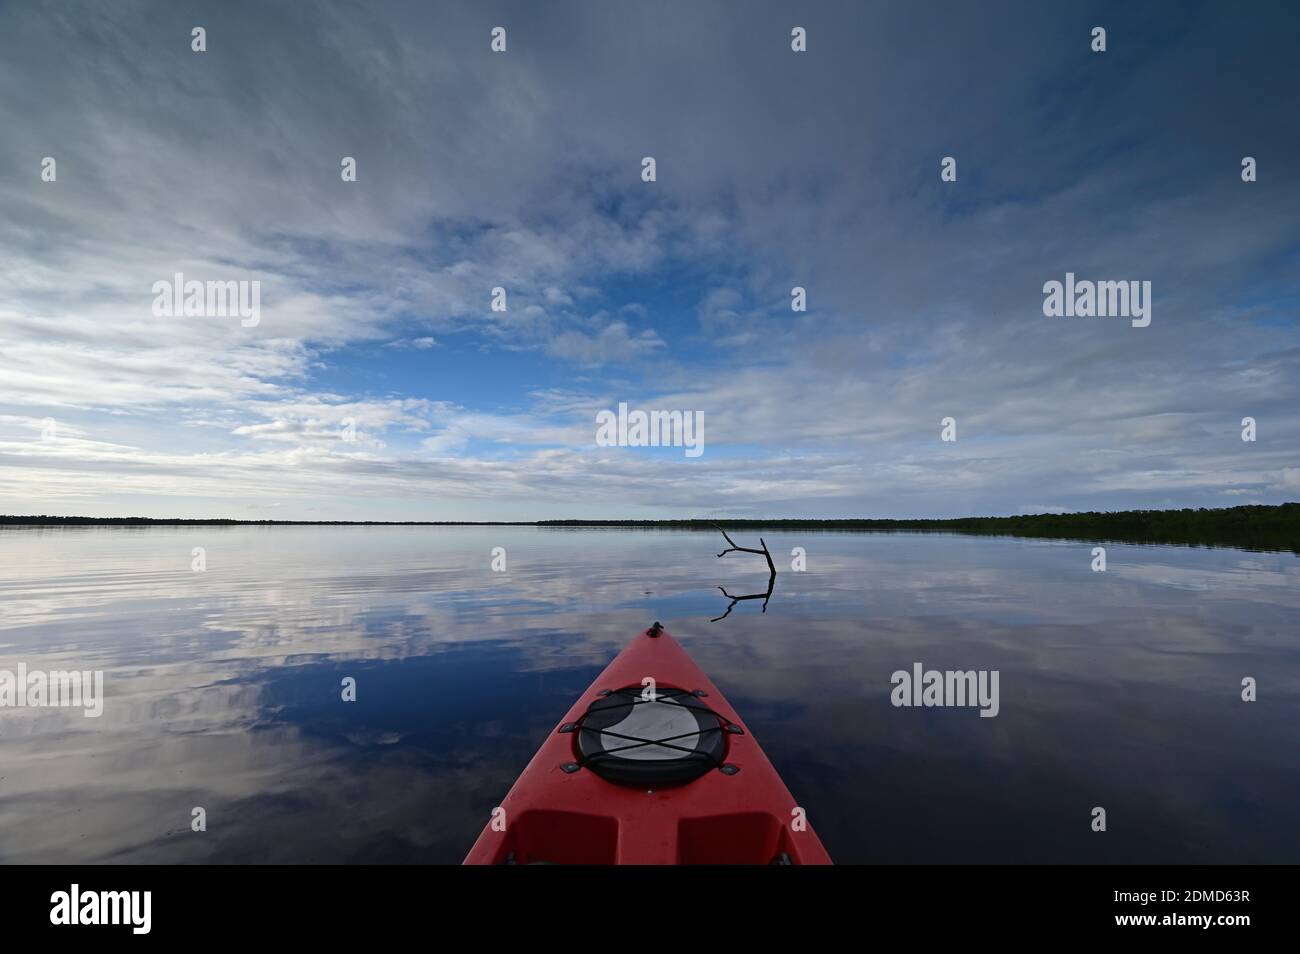 Red kayak on Coot Bay in Everglades National Park, Florida under winter cloudscape reflected in tranquil water, Stock Photo